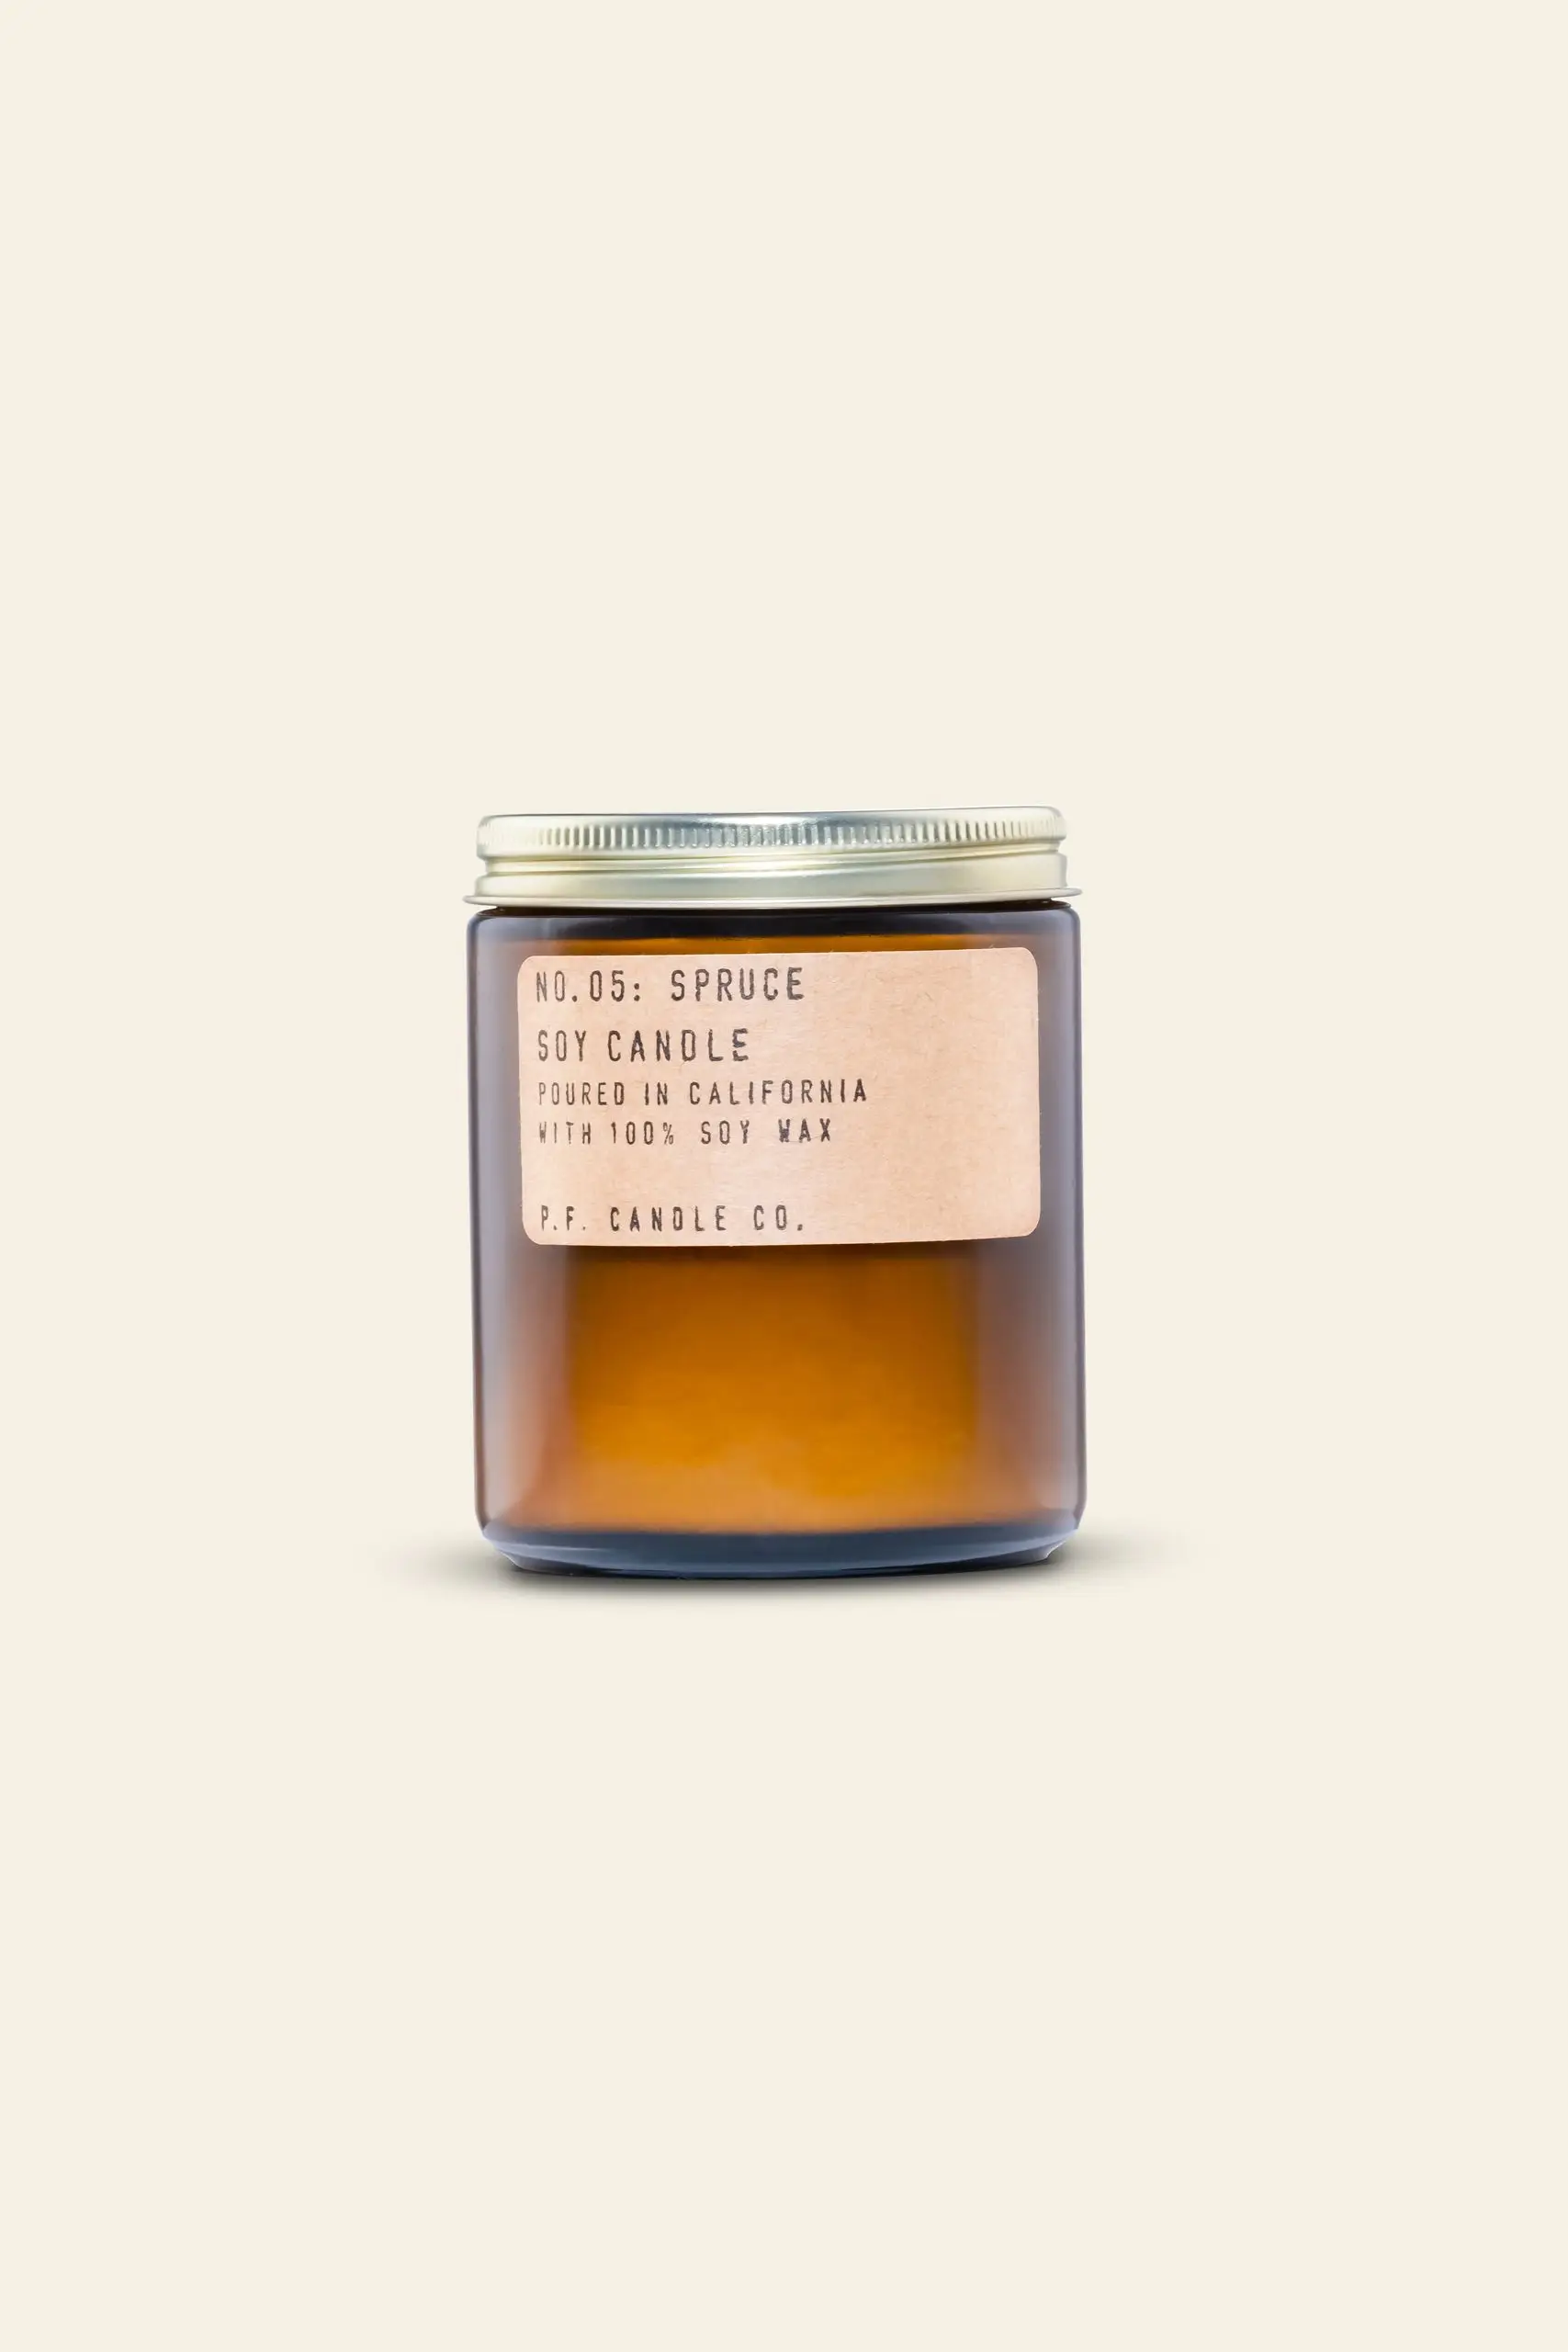 PF Candle Co Spruce 72 oz Soy Candle 1